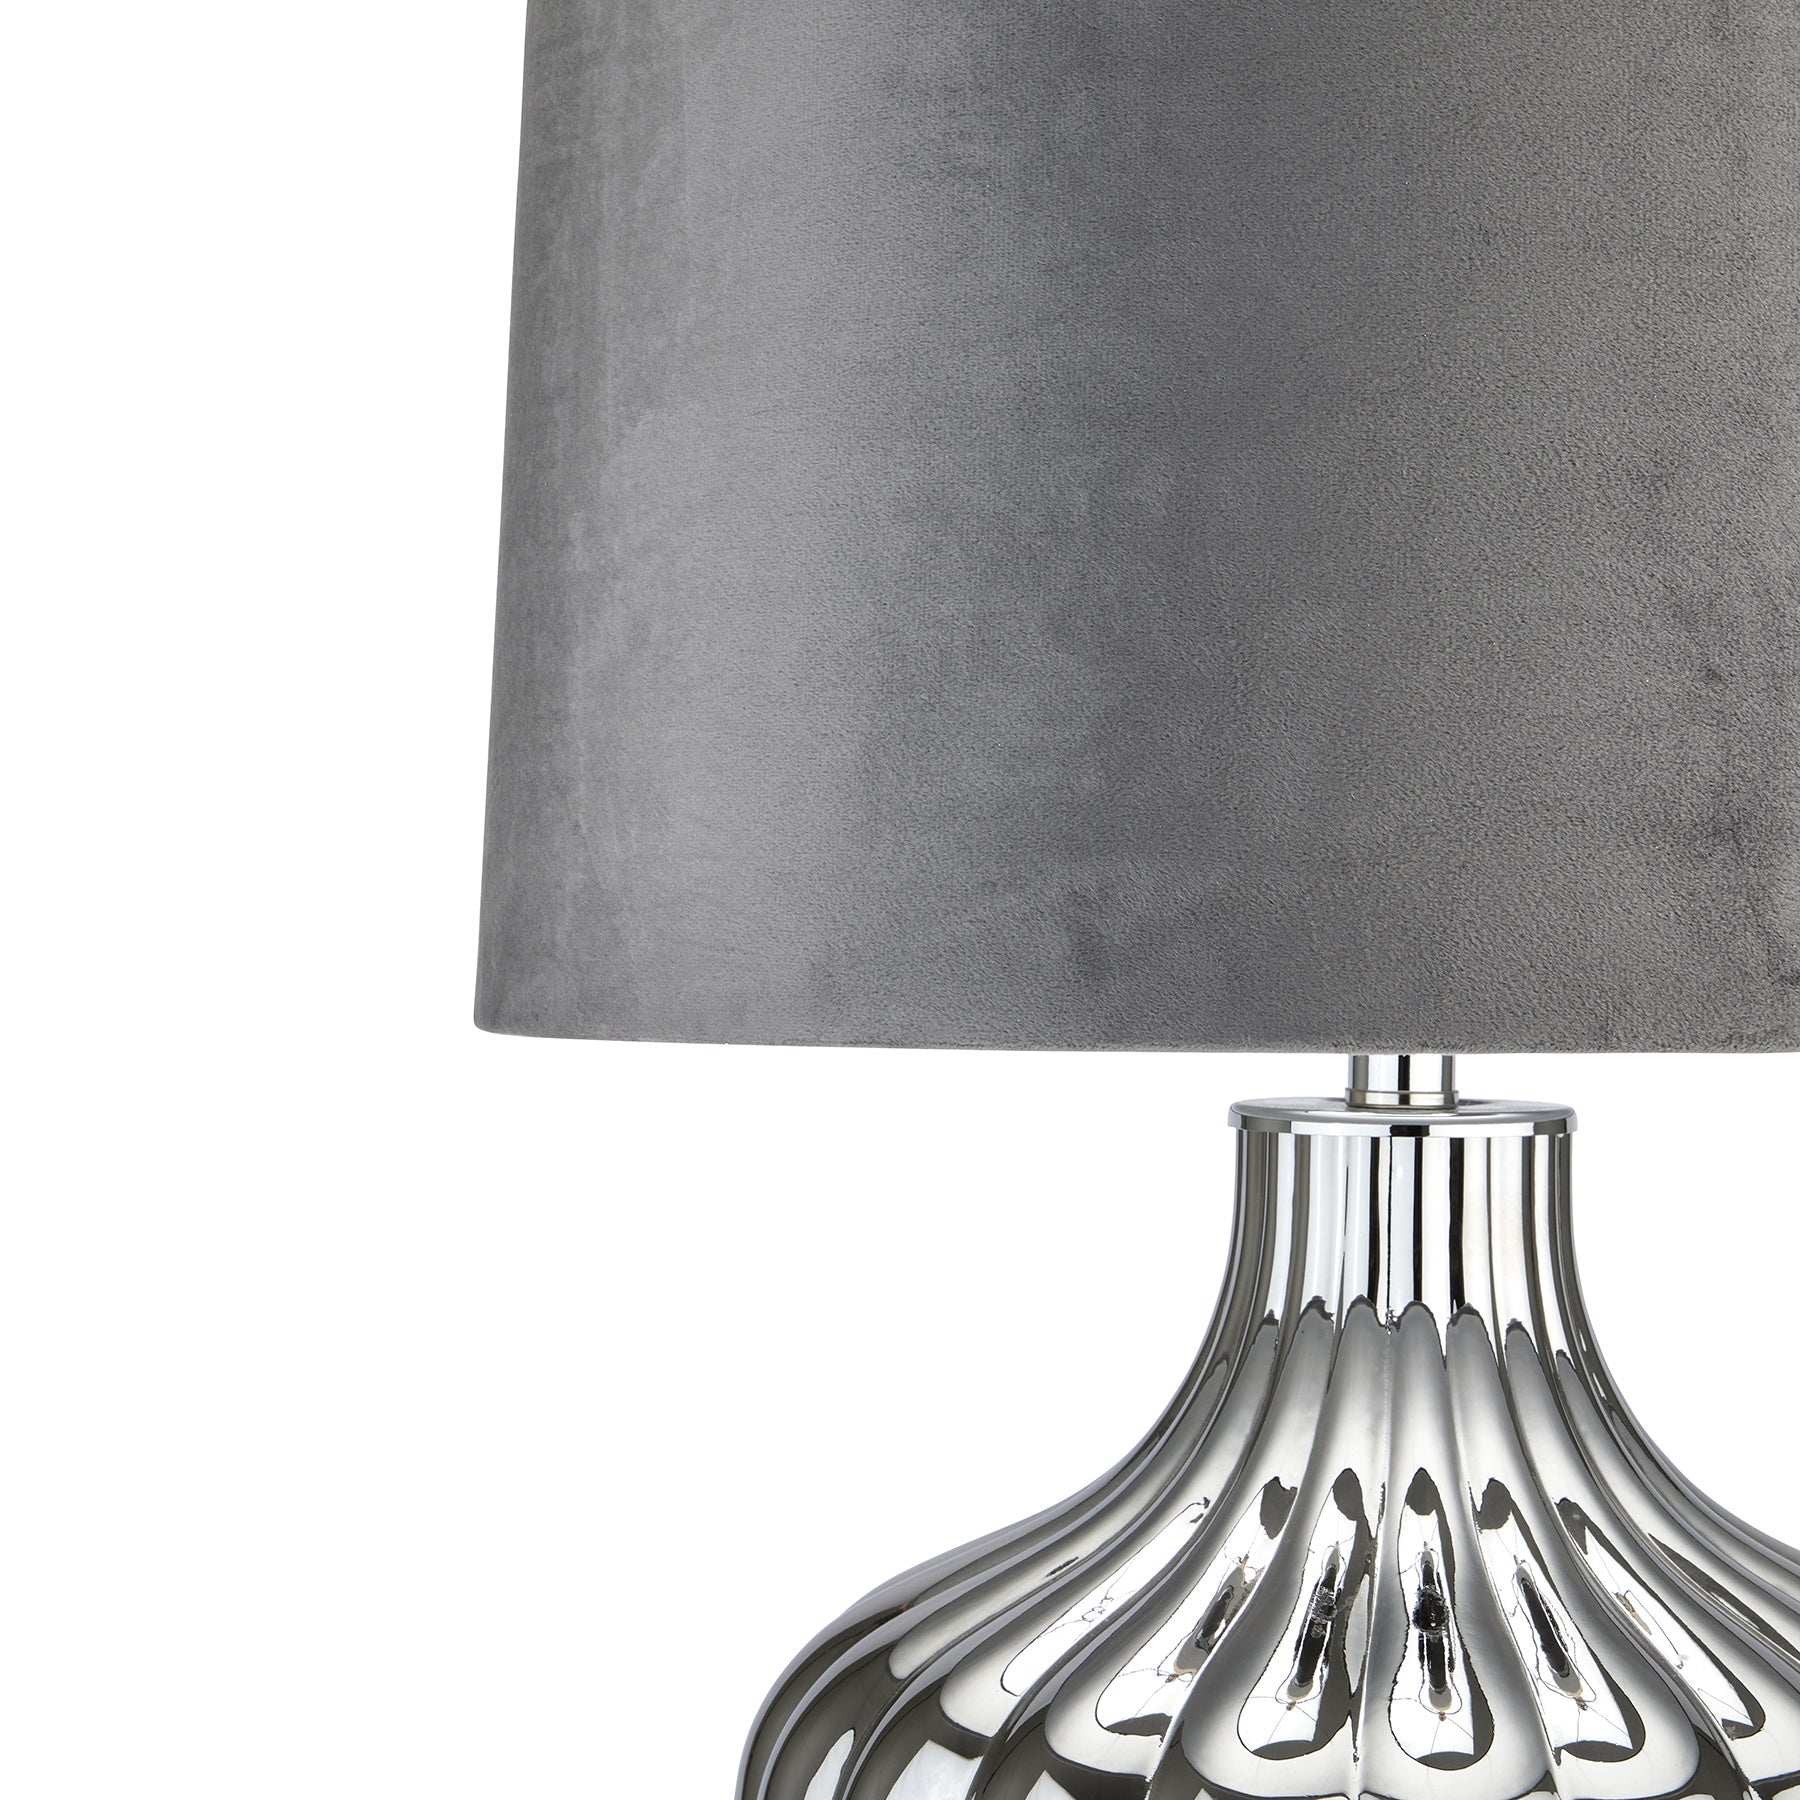 Large Silver Moonshine Table Lamp With Mid Grey Lampshade